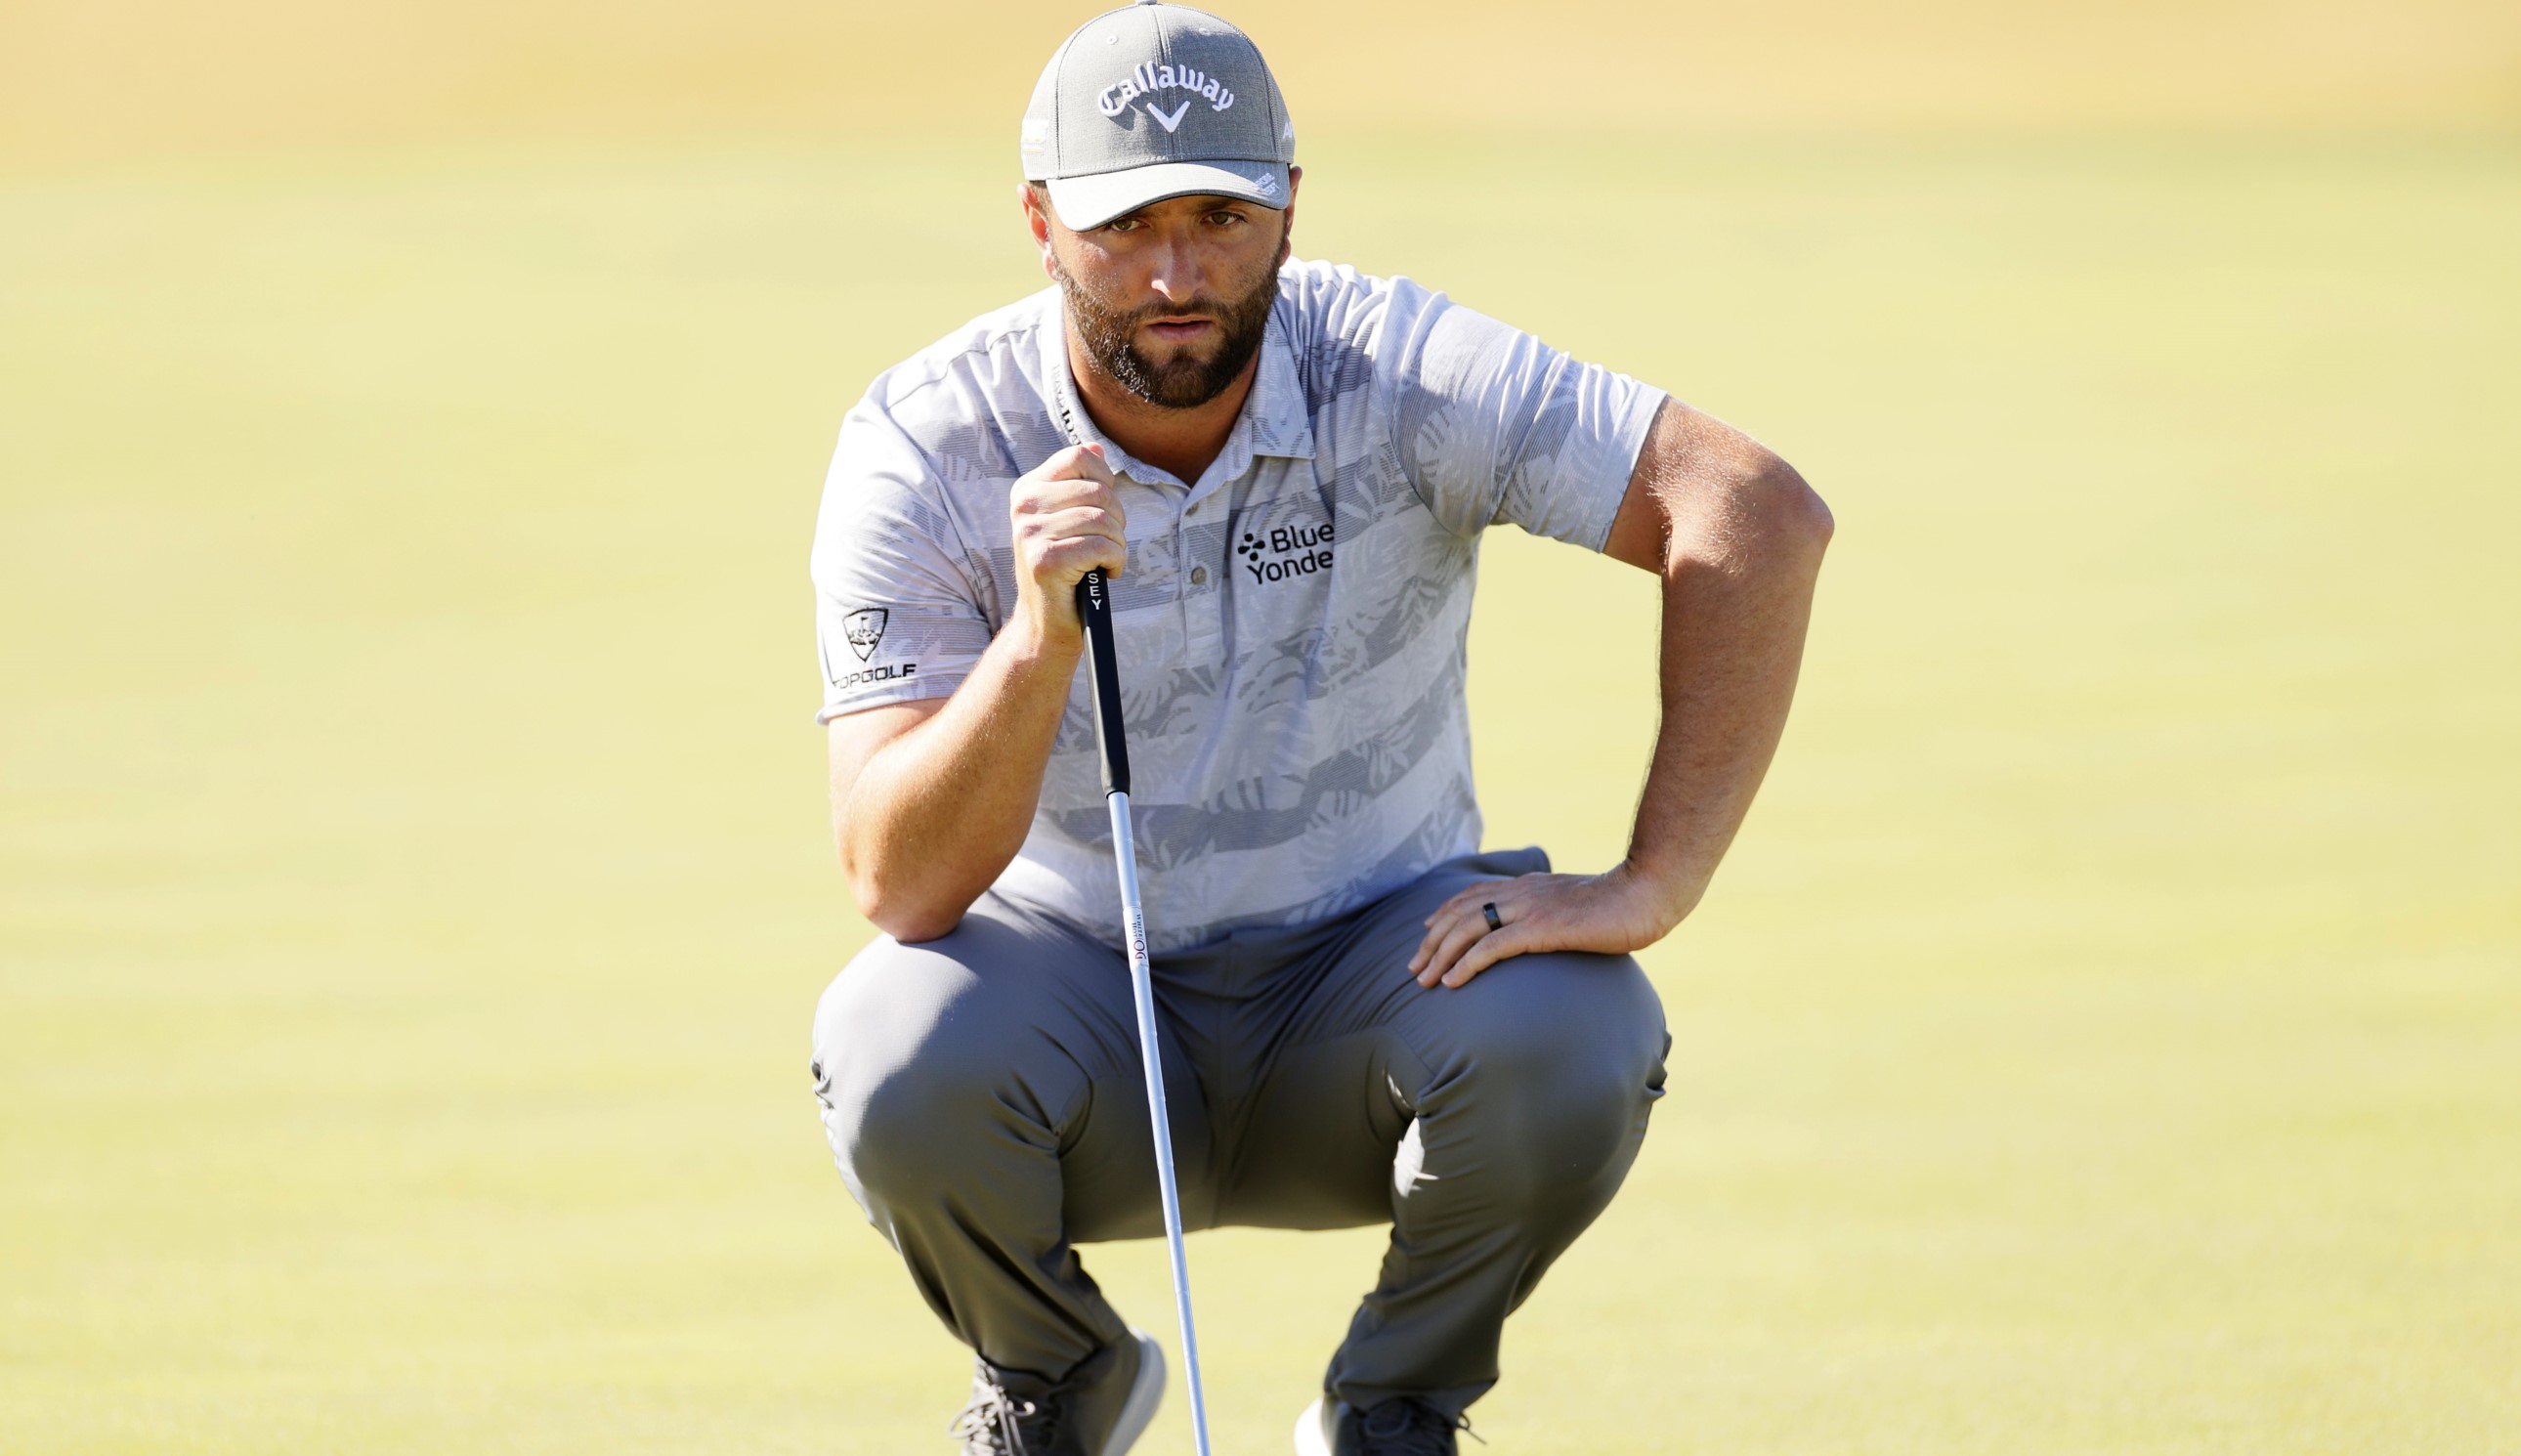  Jon Rahm Launches Expletive Rant Over American Express Course Set-Up 